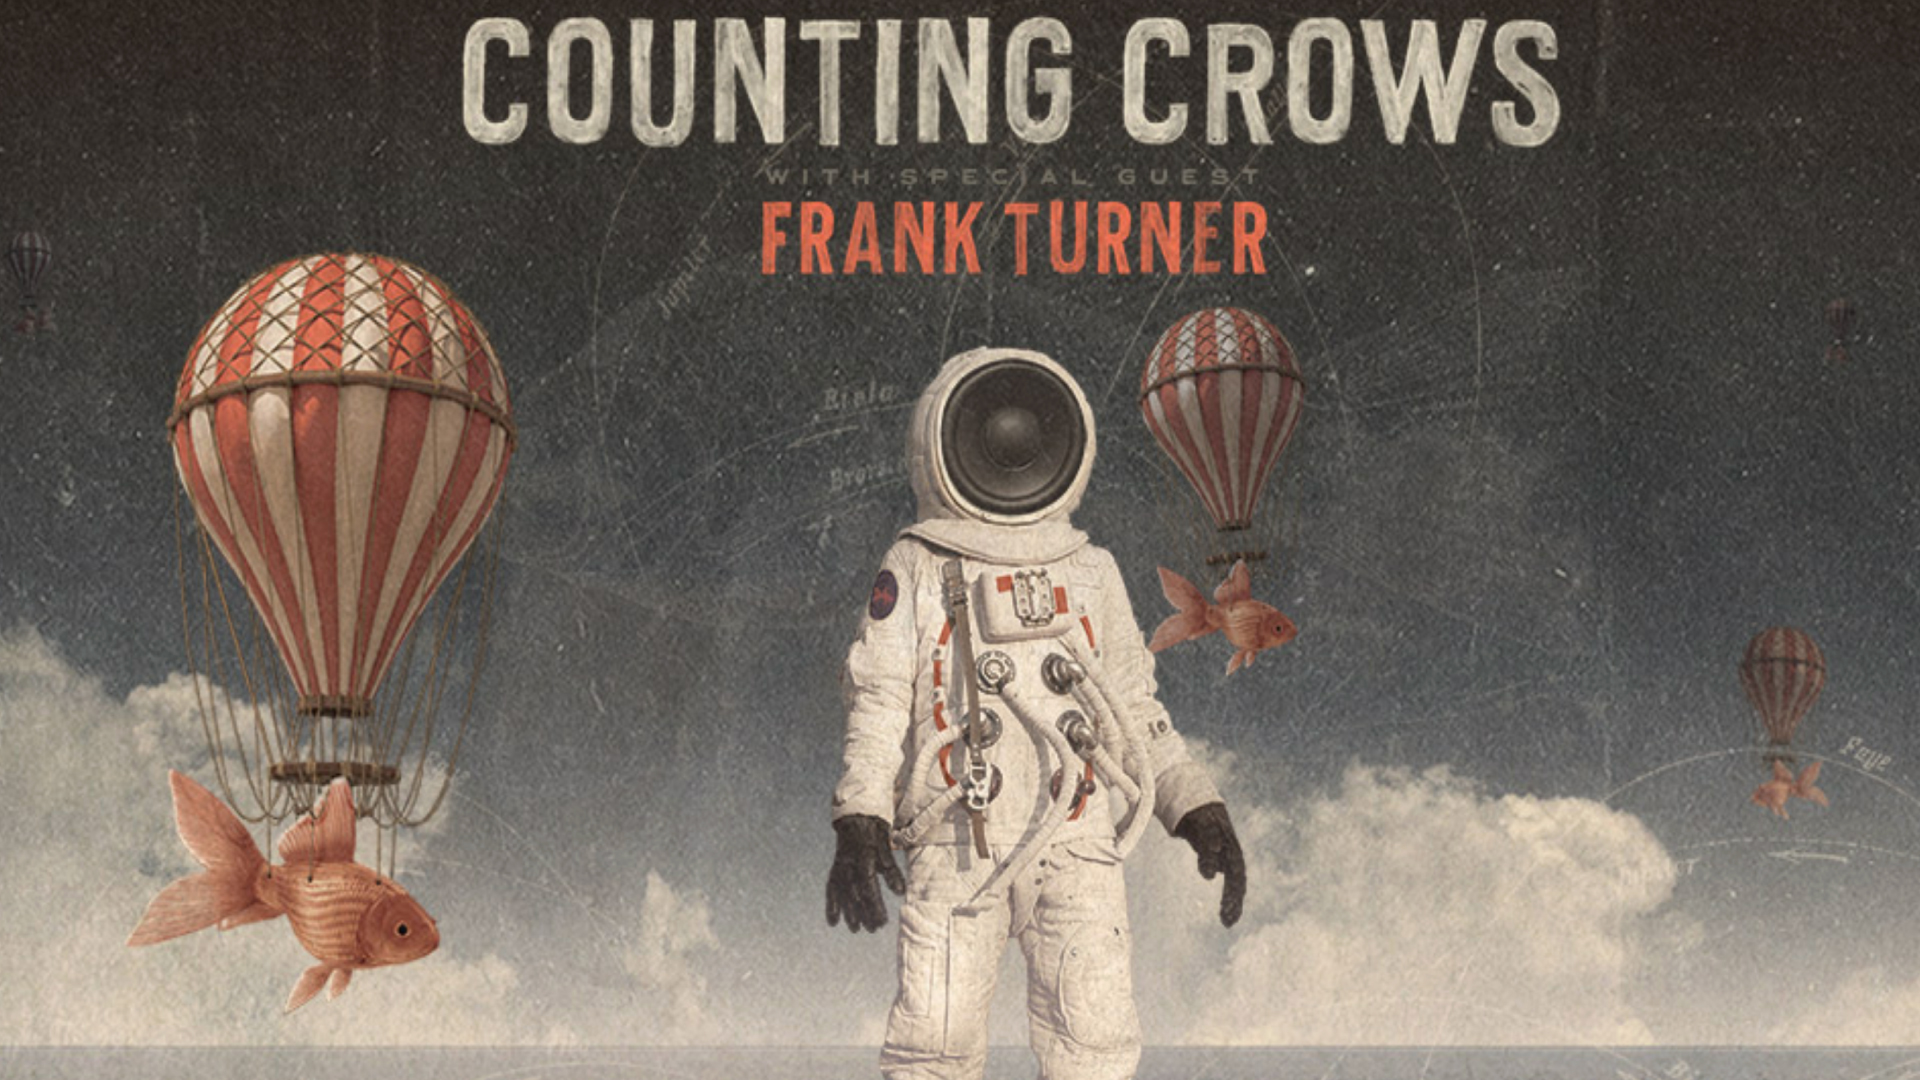 Counting Crows with FRANK TURNER